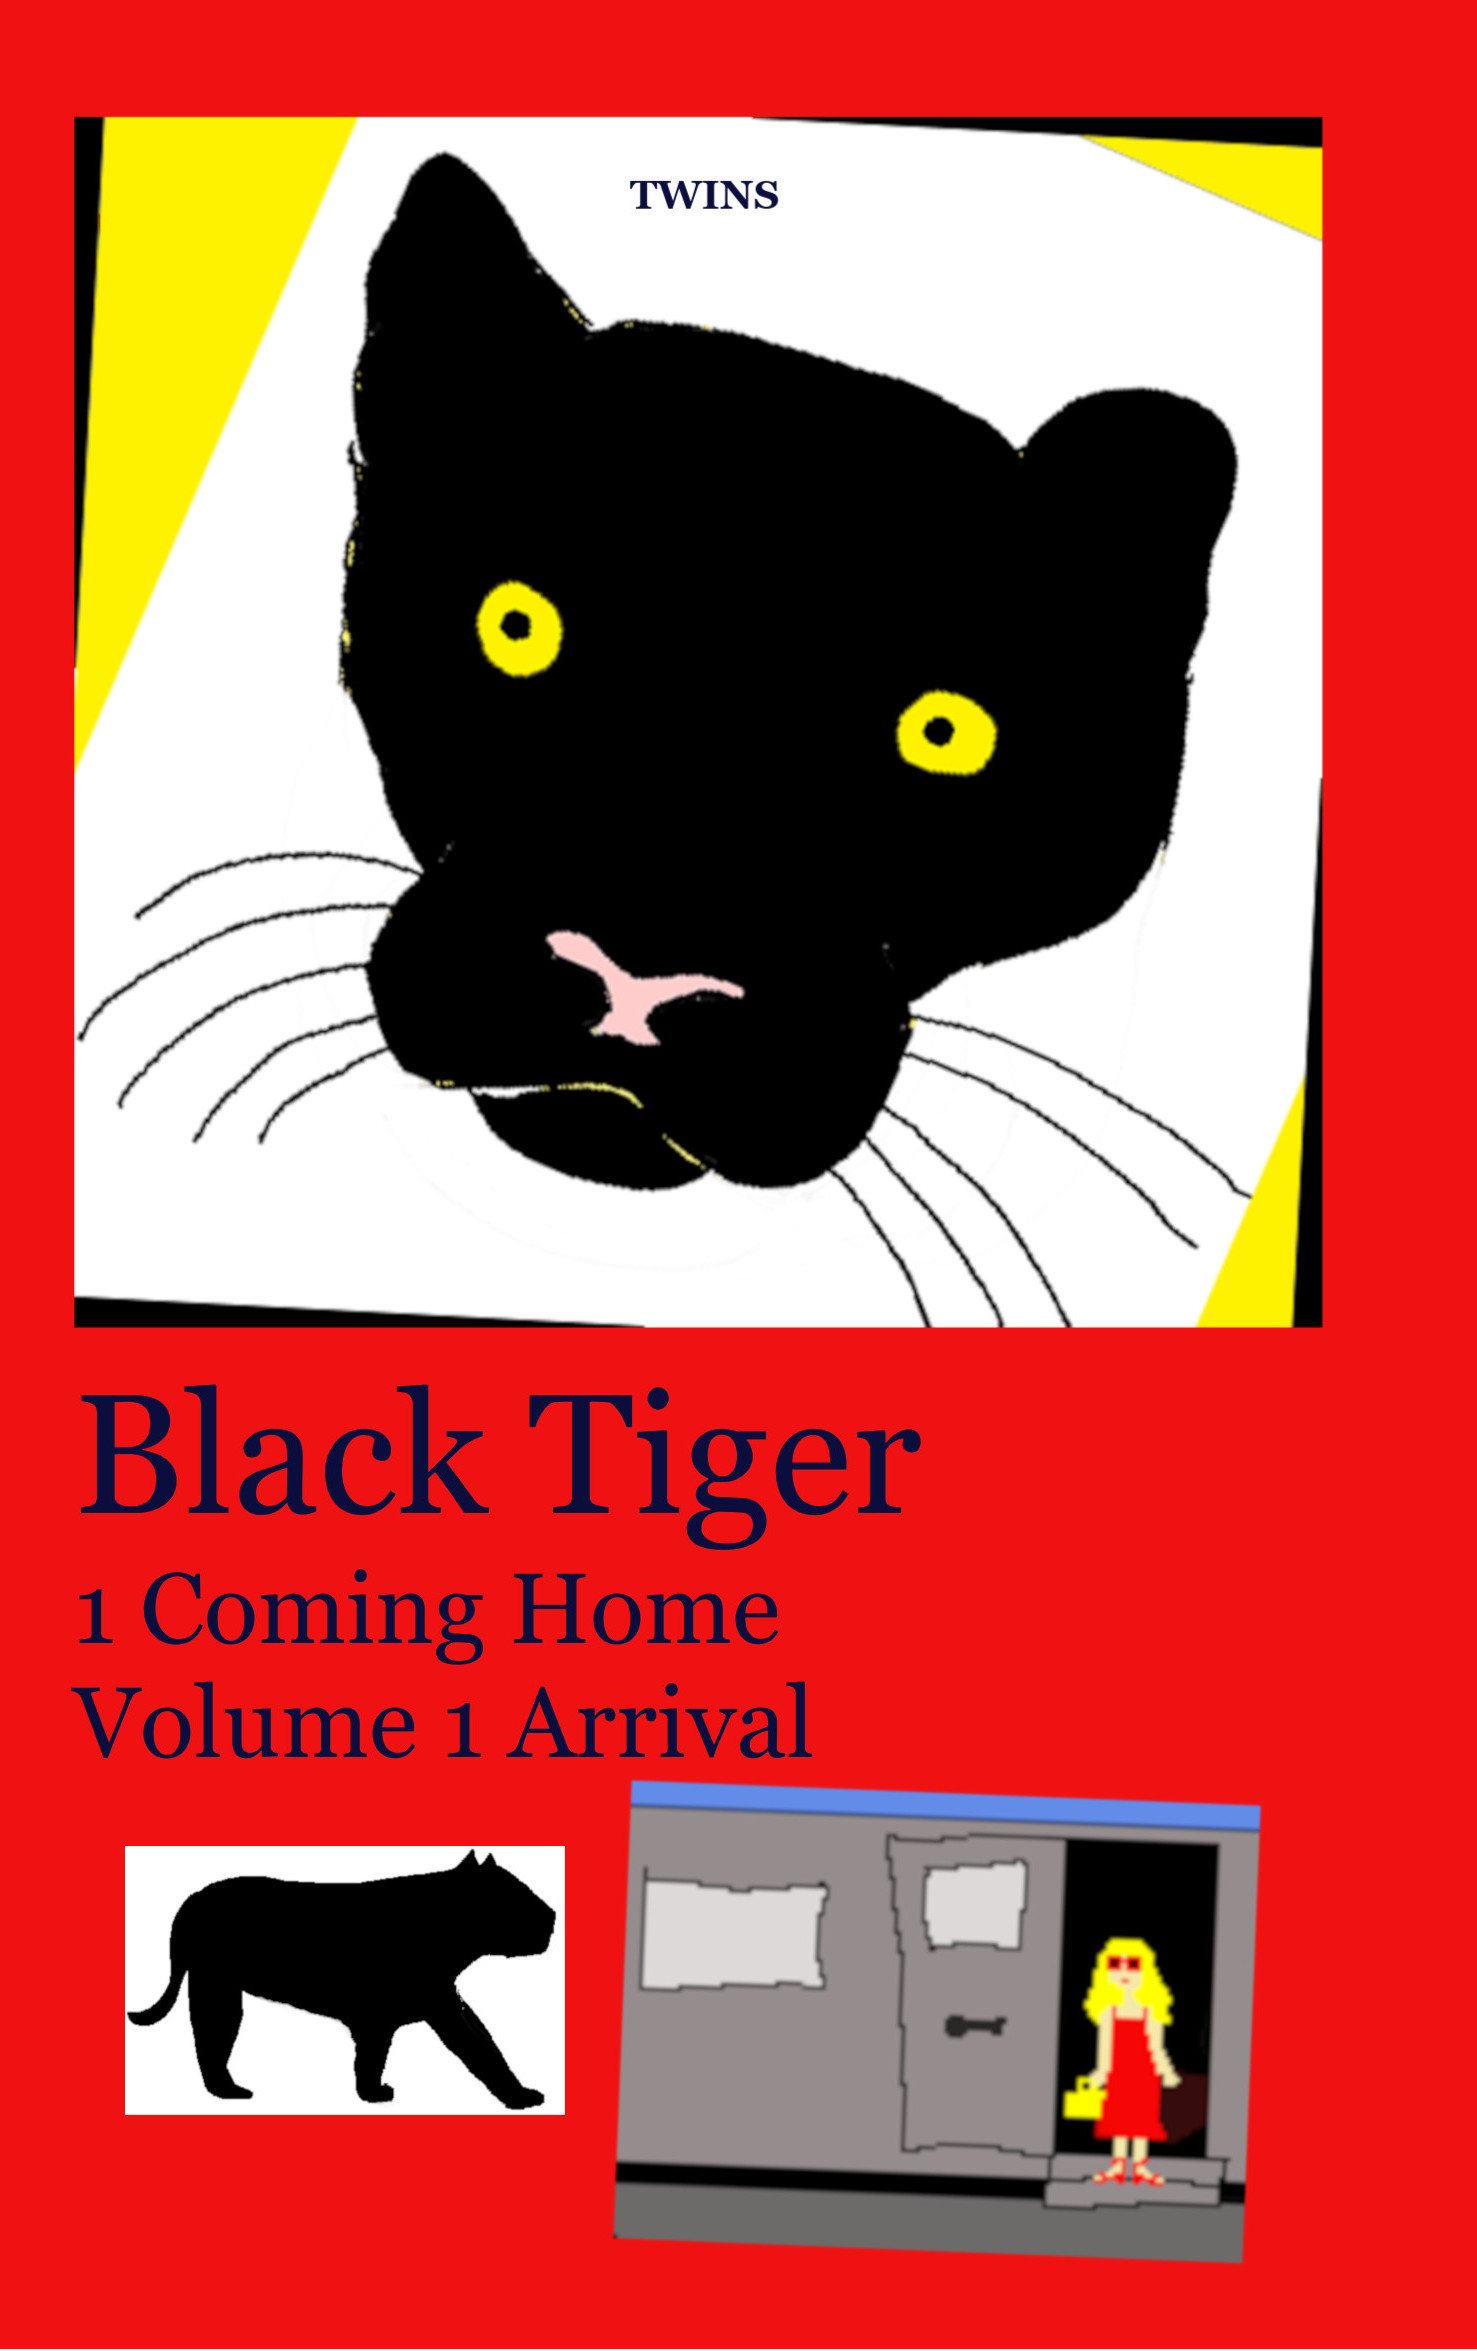 Frontcover Black Tiger Book 1 Coming Home: Volume 1 Arrival by TWINS